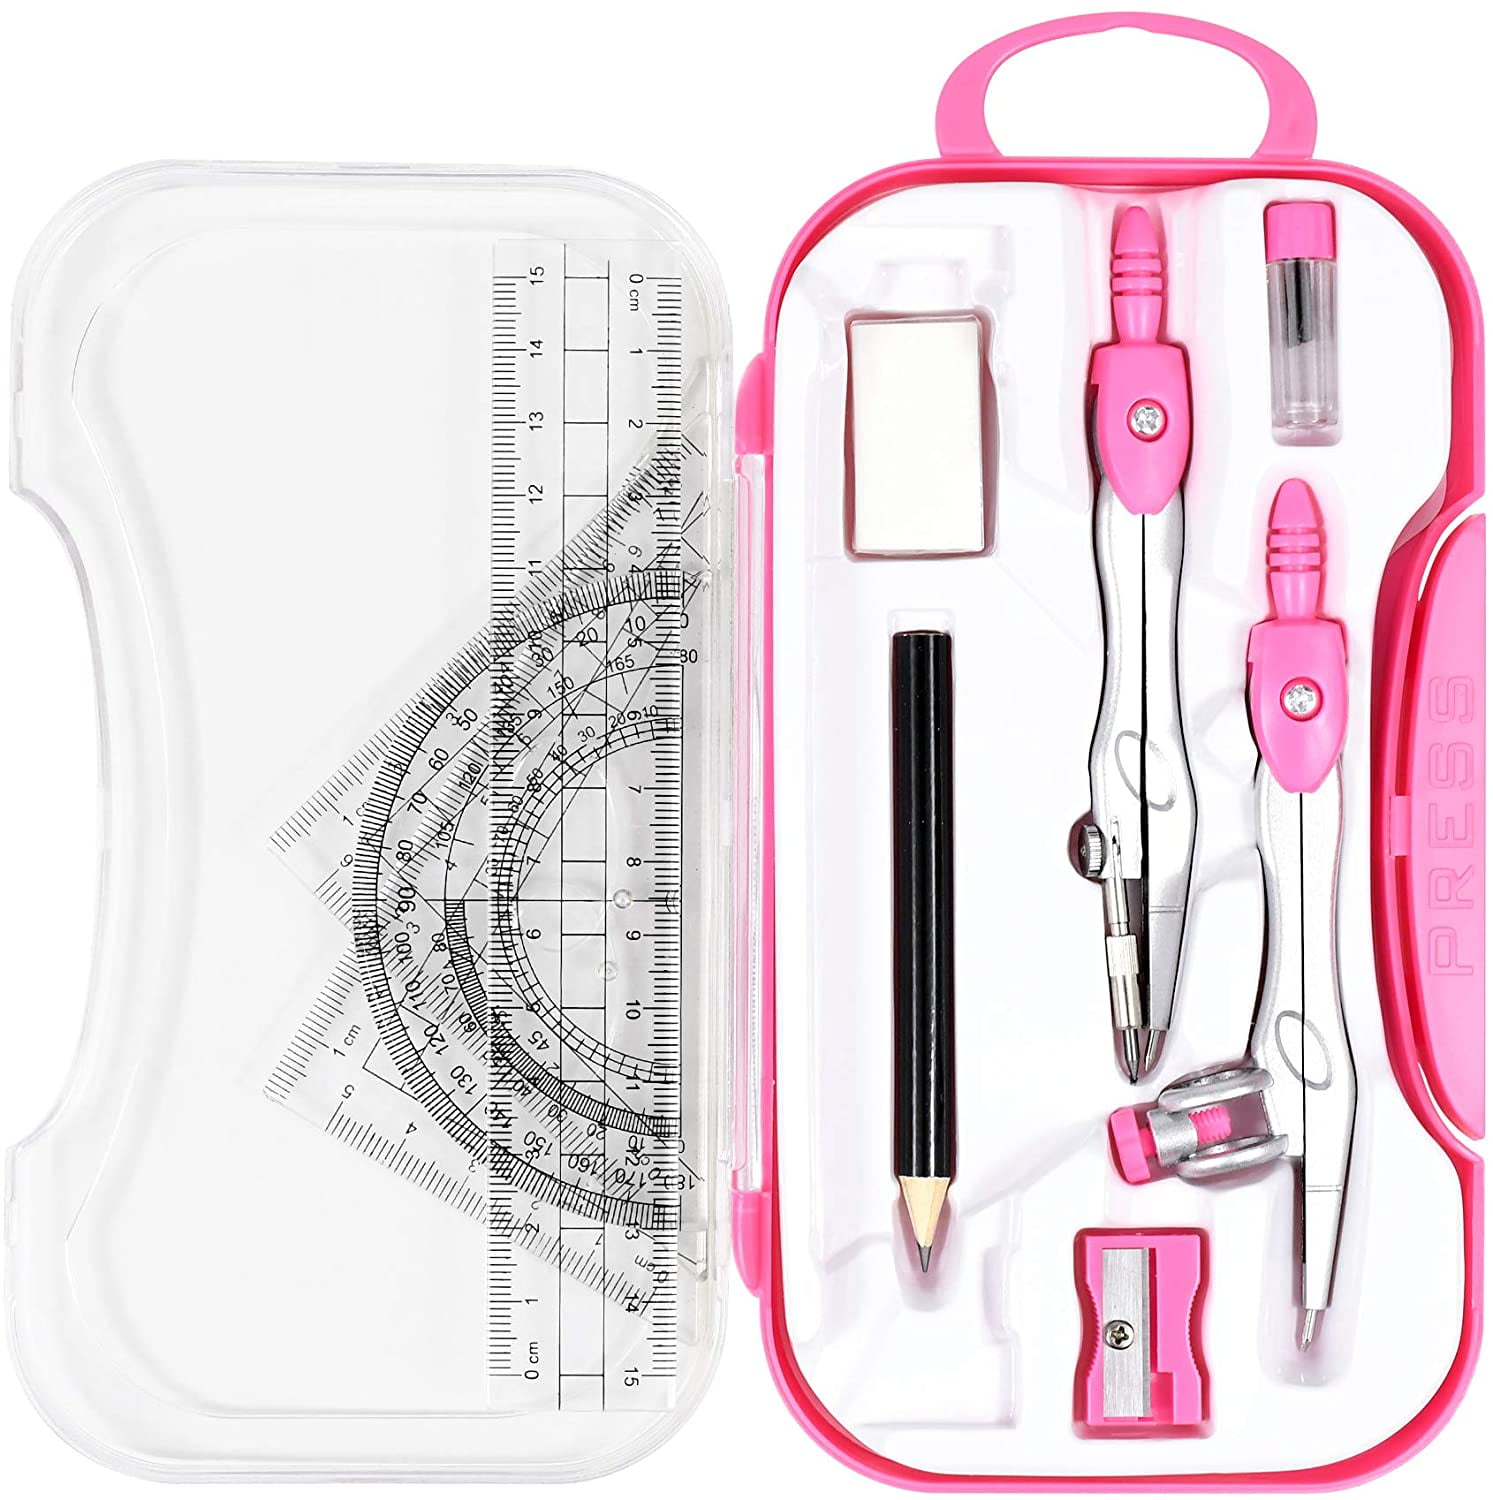 Includes Ruler Protractor Student Supplies with Shatterproof Storage Box Eraser 10 Pieces Math Geometry Kit Set 10 Pieces Pencil Pencil Compass Sharpener,Lead Refills 